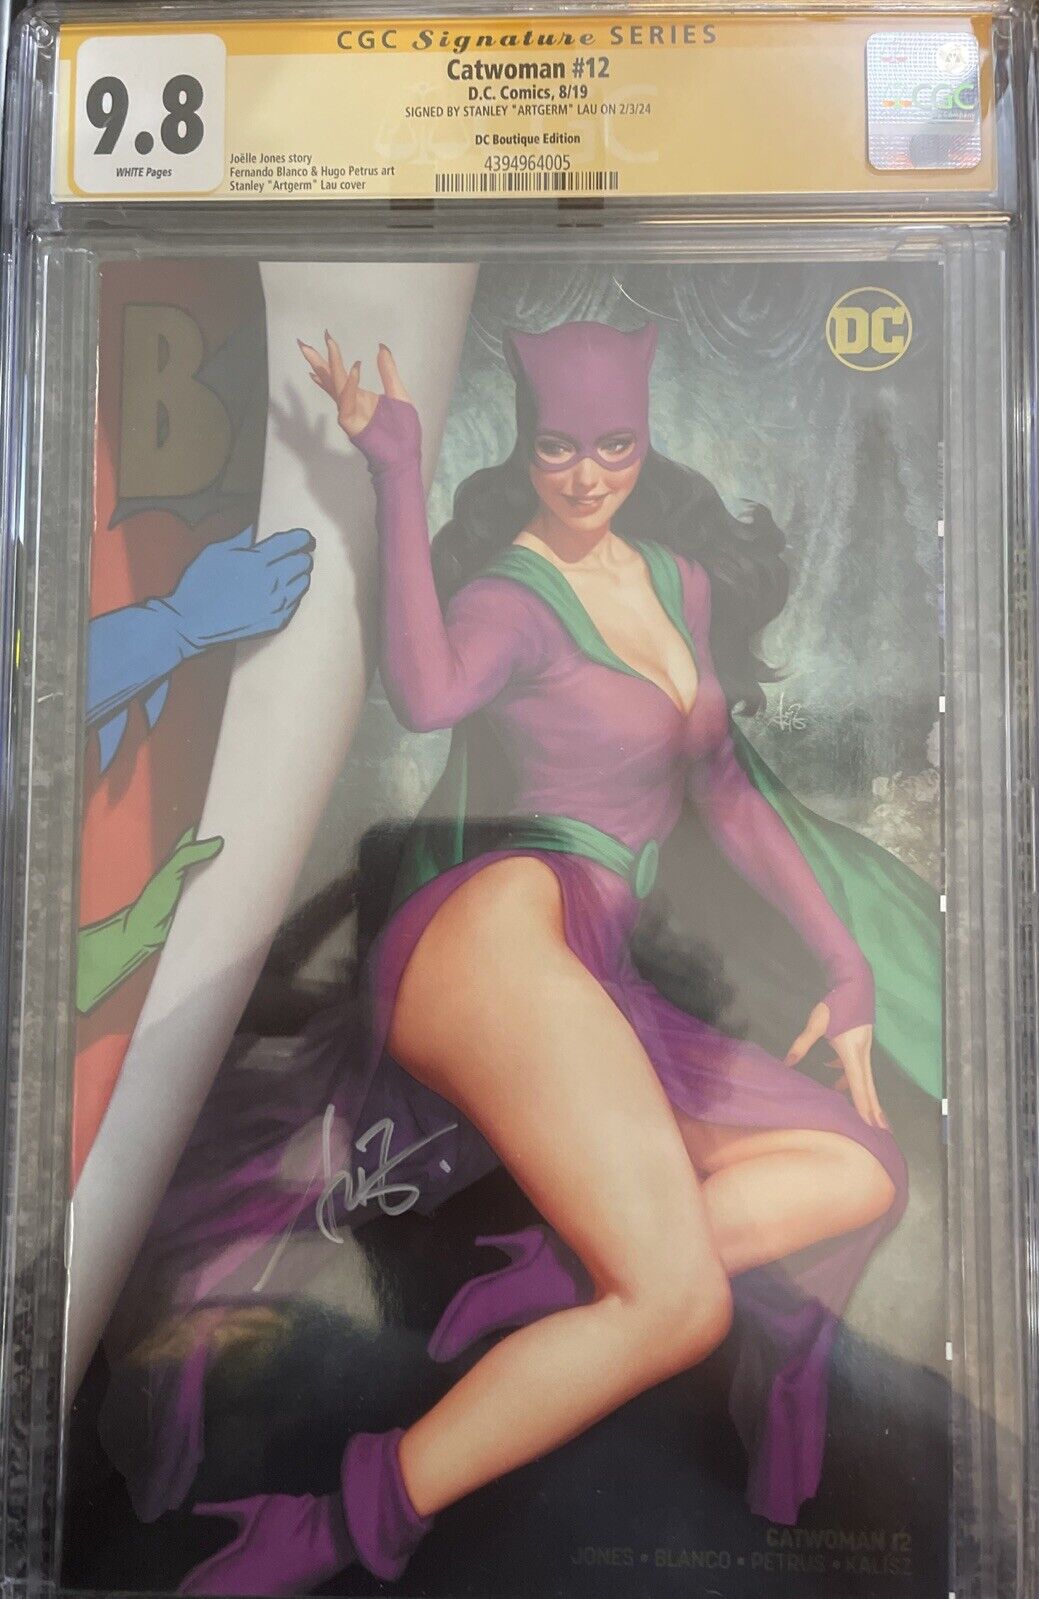 Catwoman 12 CGC SS 9.8 Artgerm Signed Golden Age Catwoman Variant PIN-UP DC 2019